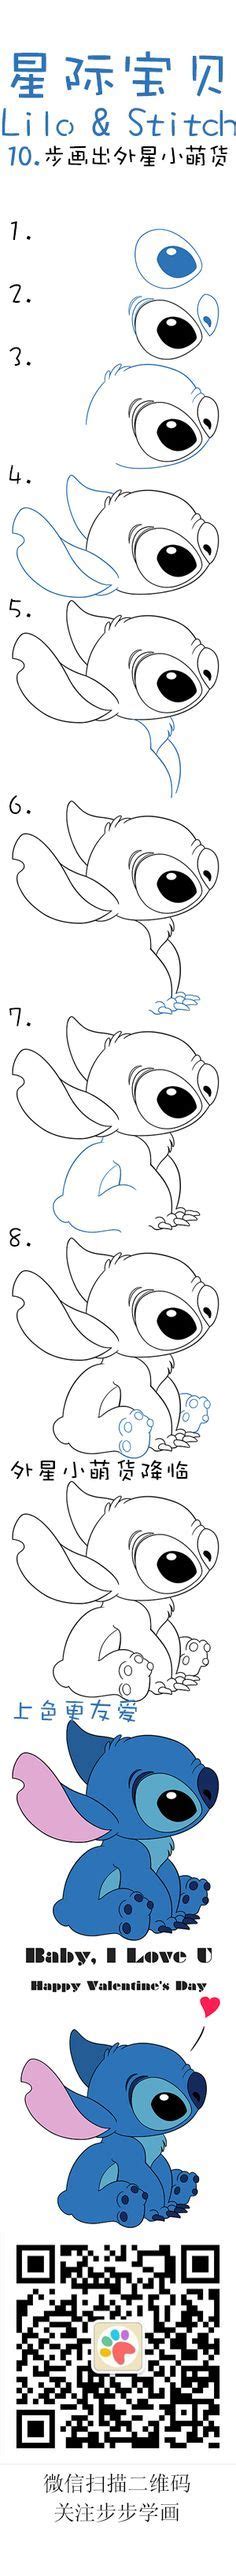 56 Best Stey By Step Drawing Tutorials For Kids Images On Pinterest